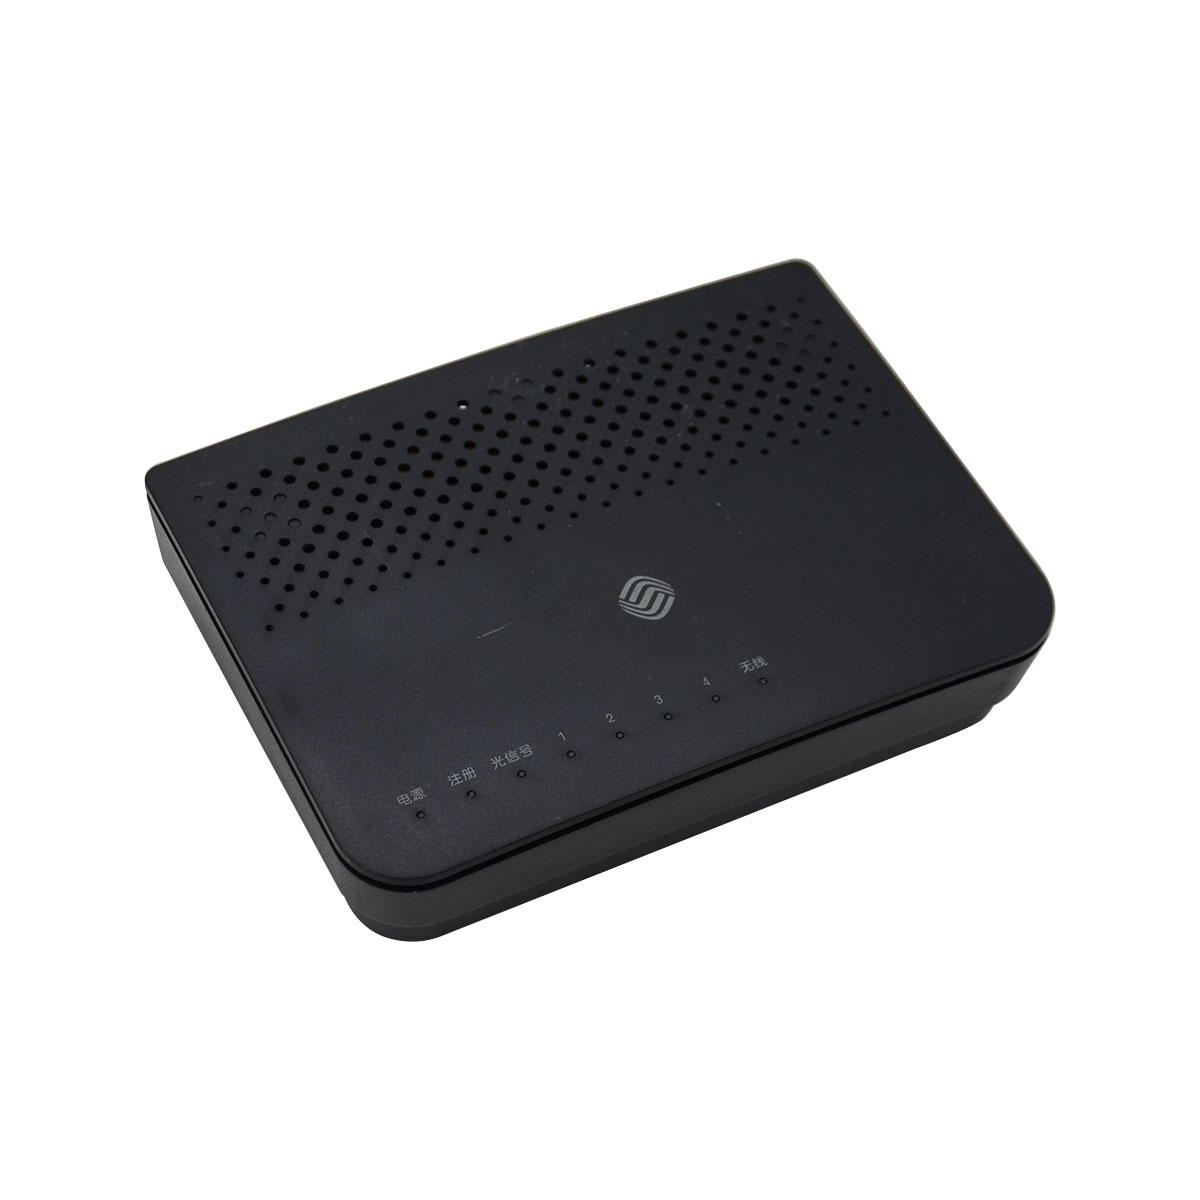 GS3202 Optical Network Terminal Best Price At Telecomate.com.